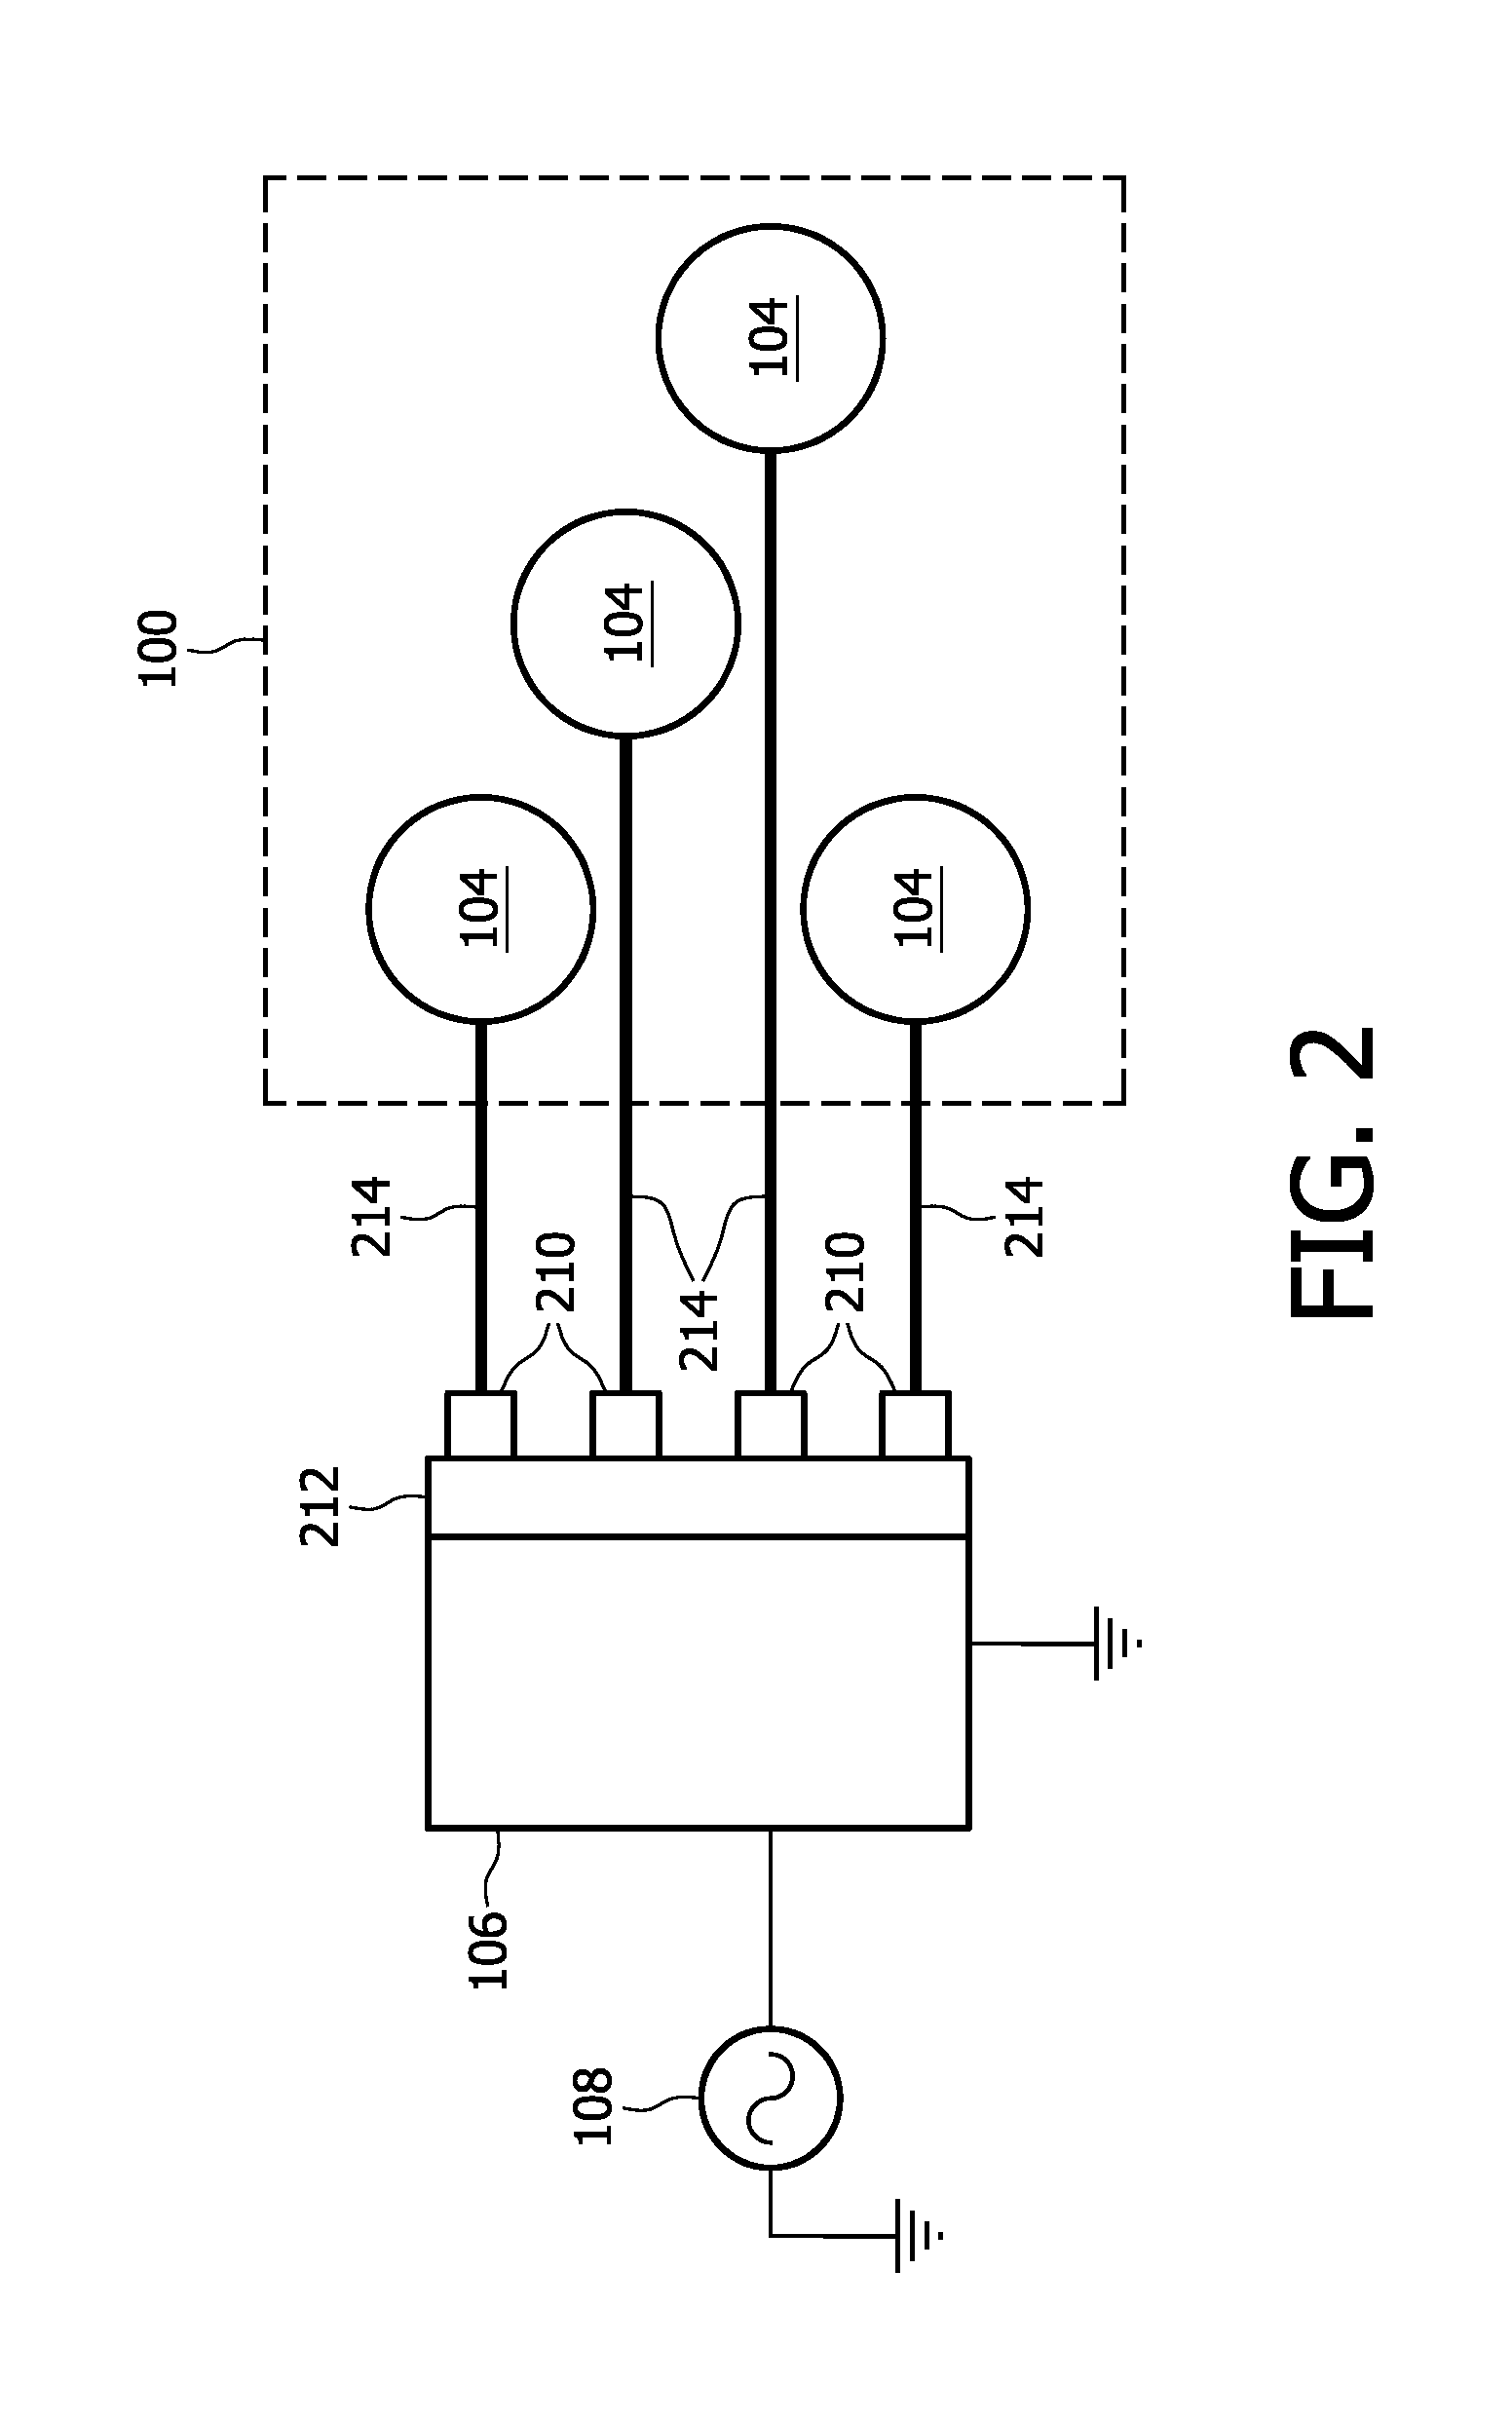 Magnetic resonance imaging system comprising a power supply unit adapted for providing direct current electrical power